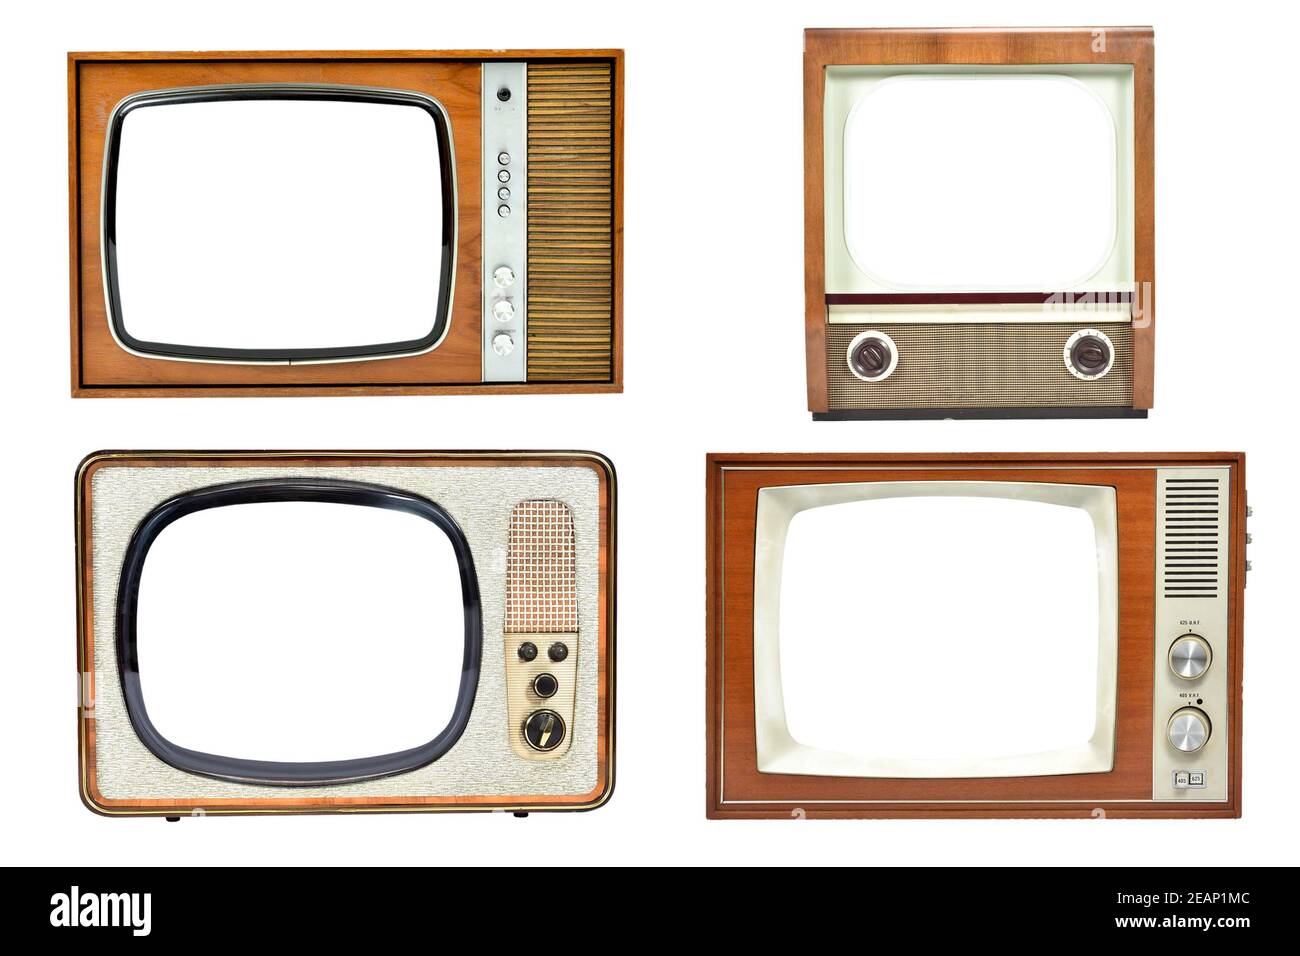 Vintage TV set collection with blank screen isolated Stock Photo